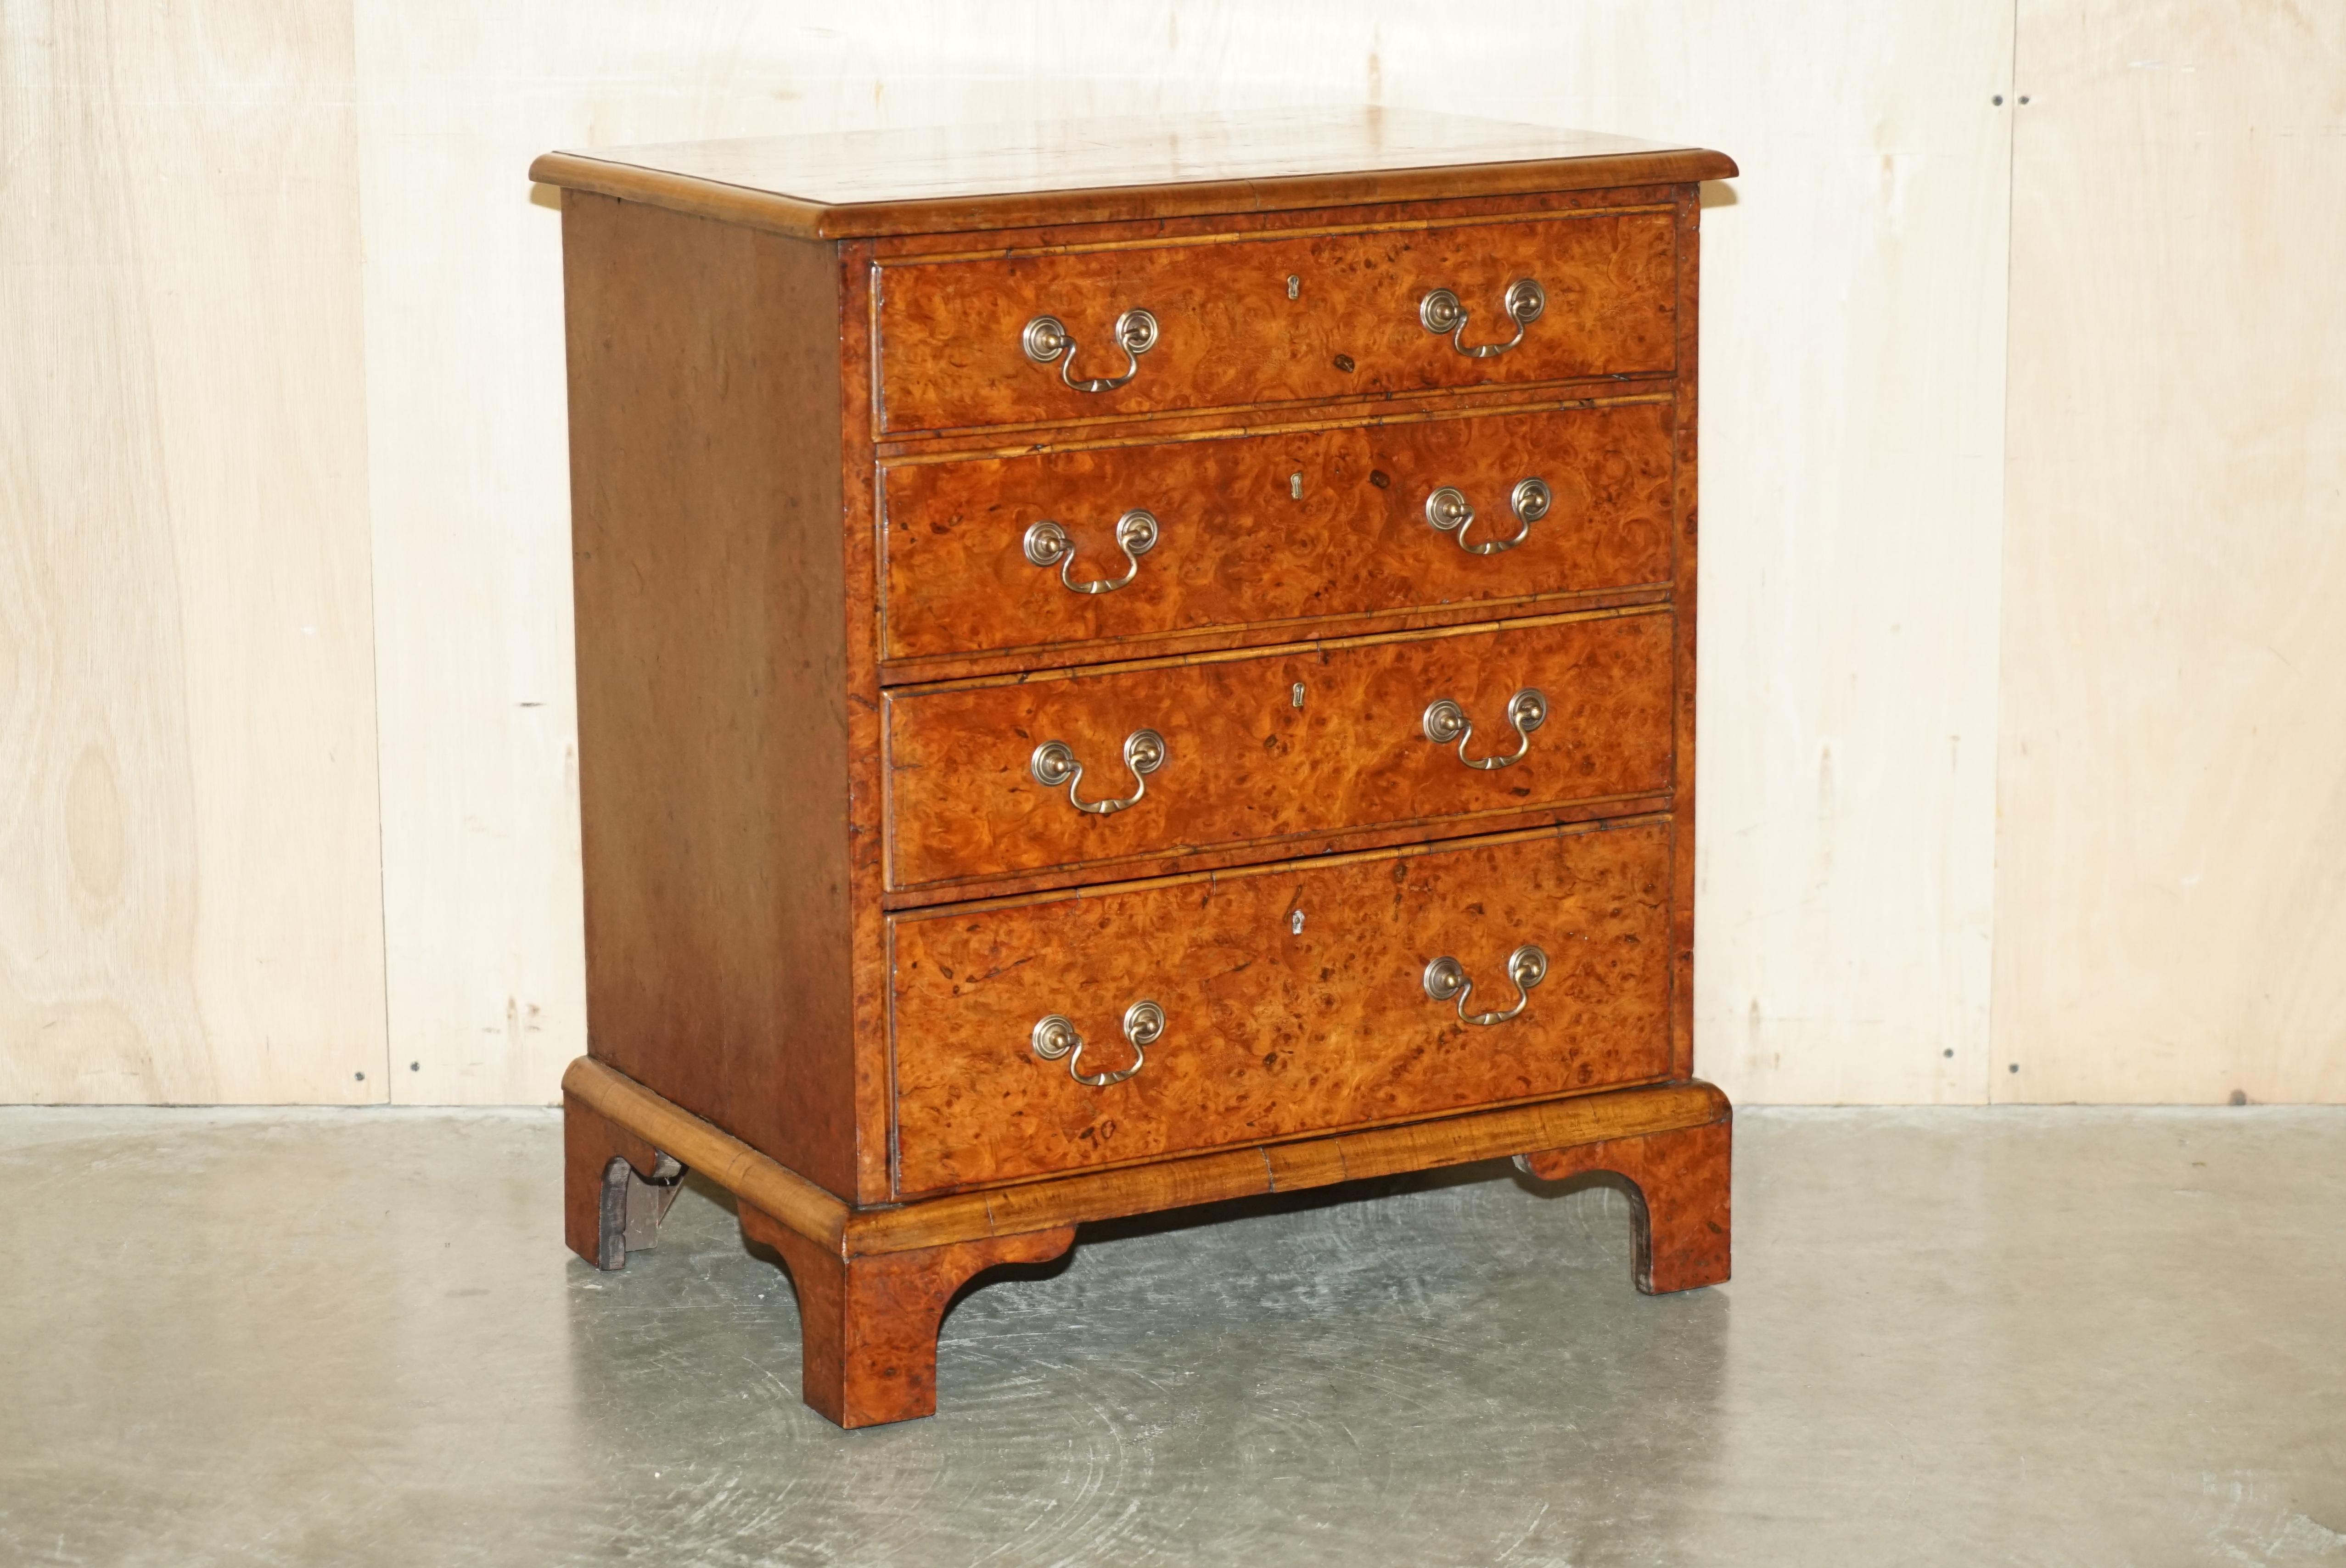 Royal House Antiques

Royal House Antiques is delighted to offer for sale this super fine circa 1780-1800 George III Fully restored Burr Elm small chest of drawers

Please note the delivery fee listed is just a guide, it covers within the M25 only